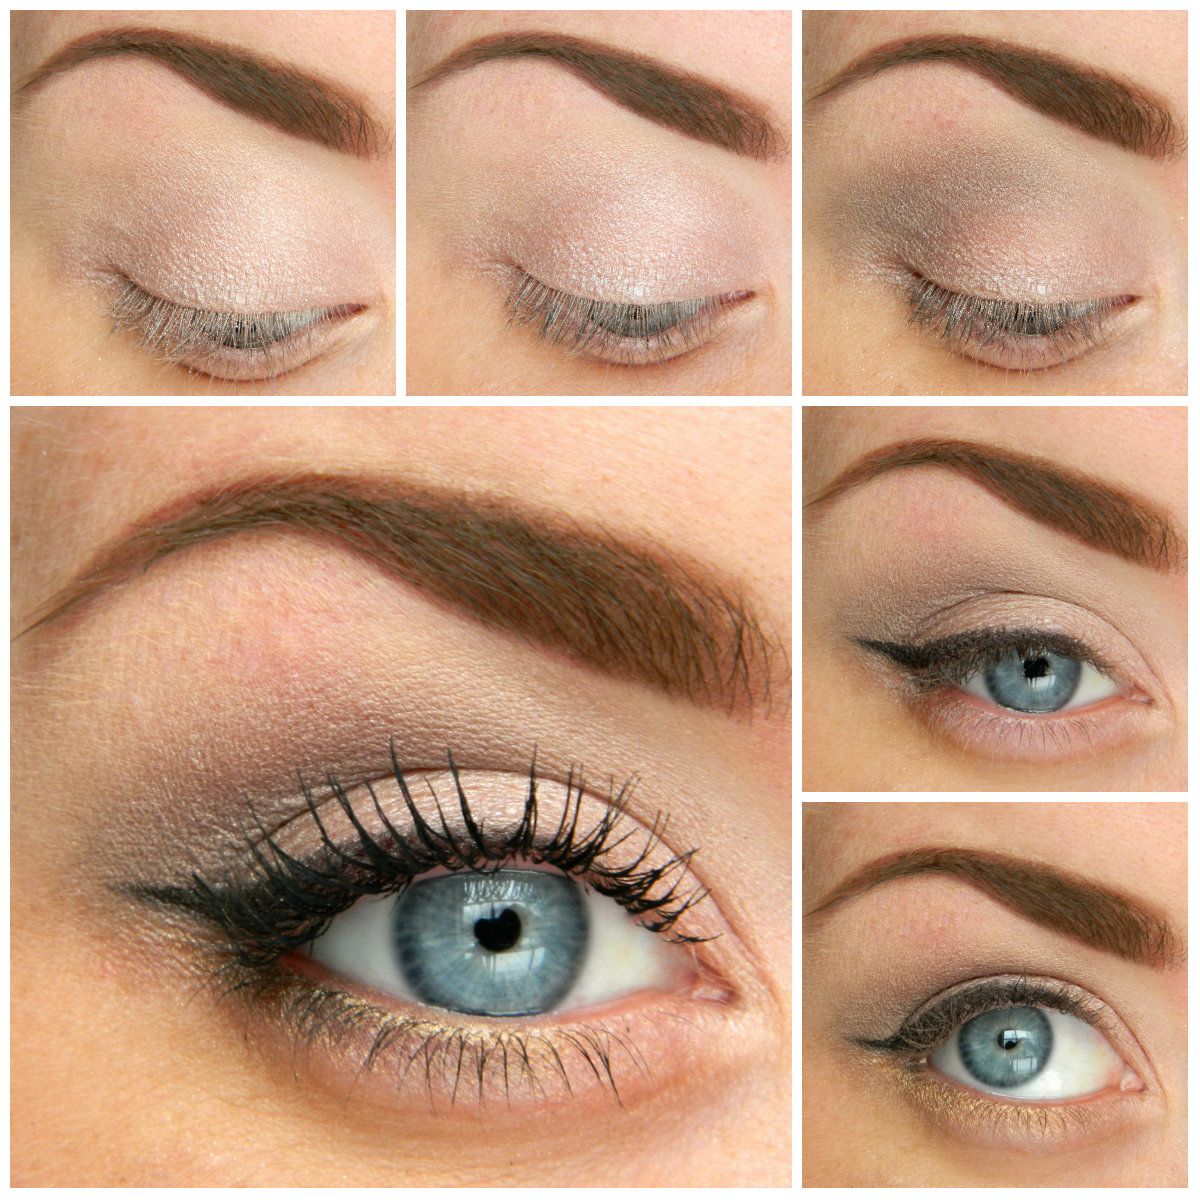 Homecoming Makeup Brown Eyes 5 Ways To Make Blue Eyes Pop With Proper Eye Makeup Her Style Code